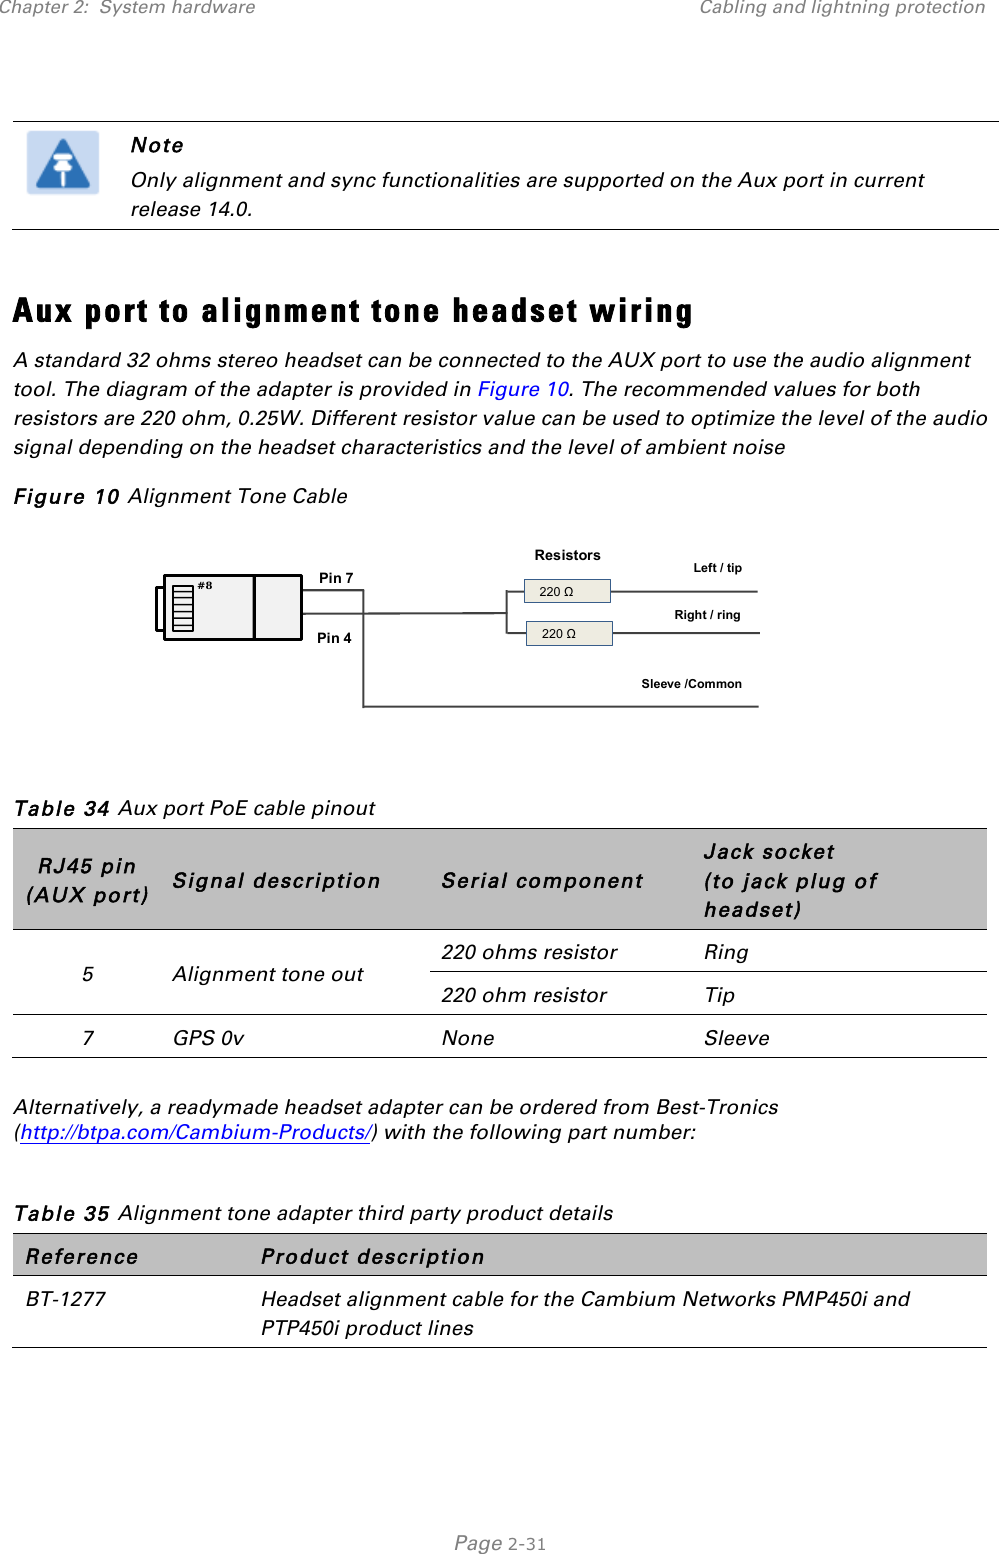 Chapter 2:  System hardware Cabling and lightning protection   Page 2-31   Note Only alignment and sync functionalities are supported on the Aux port in current release 14.0.    Aux port to alignment tone headset wiring A standard 32 ohms stereo headset can be connected to the AUX port to use the audio alignment tool. The diagram of the adapter is provided in Figure 10. The recommended values for both resistors are 220 ohm, 0.25W. Different resistor value can be used to optimize the level of the audio signal depending on the headset characteristics and the level of ambient noise Figure 10 Alignment Tone Cable   Table 34 Aux port PoE cable pinout RJ45 pin (AUX port) Signal description Serial component Jack socket (to jack plug of headset) 5 Alignment tone out 220 ohms resistor Ring 220 ohm resistor Tip 7 GPS 0v None Sleeve  Alternatively, a readymade headset adapter can be ordered from Best-Tronics (http://btpa.com/Cambium-Products/) with the following part number:  Table 35 Alignment tone adapter third party product details Reference Product description BT-1277 Headset alignment cable for the Cambium Networks PMP450i and PTP450i product lines    220 Ω  220 Ω Resistors Pin 7 Pin 4 Left / tip Right / ring  Sleeve /Common #8  